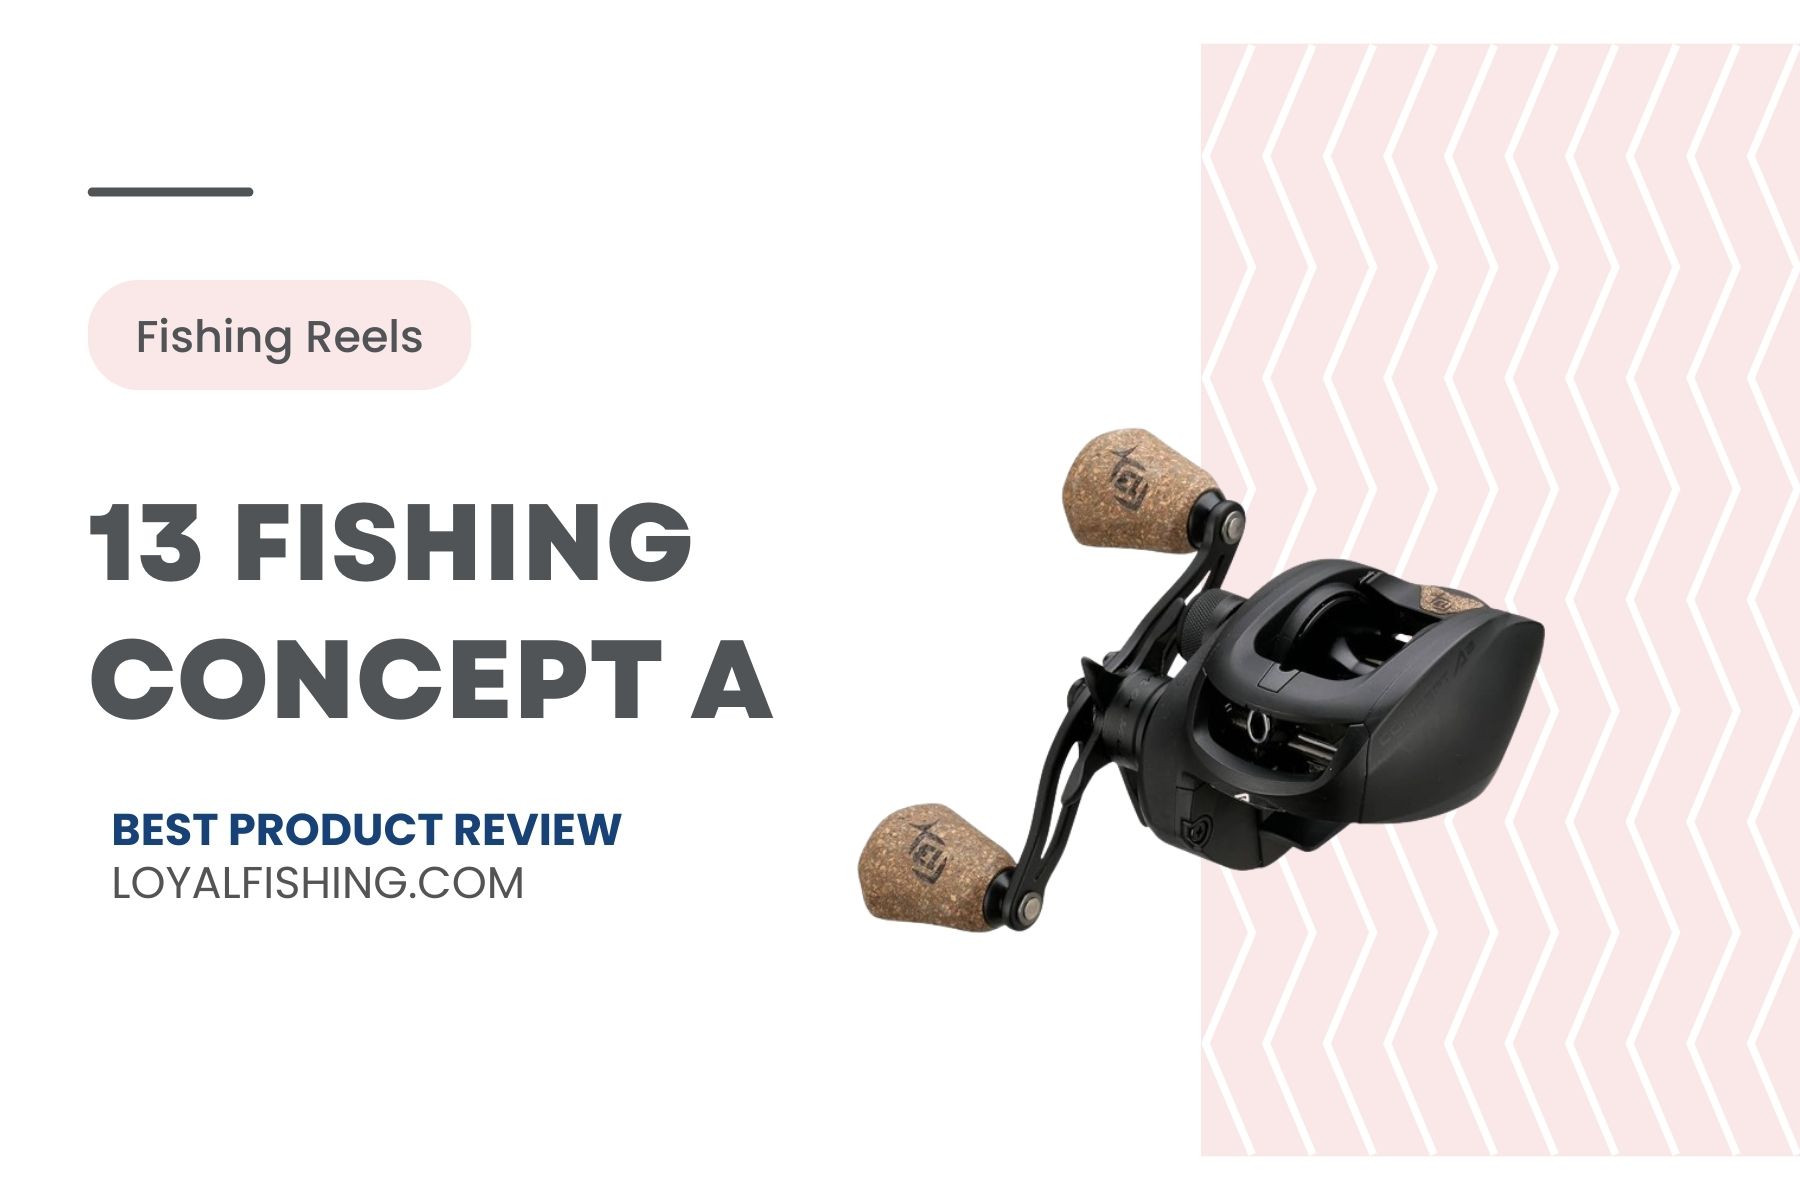 13 Fishing Concept A - Review Post